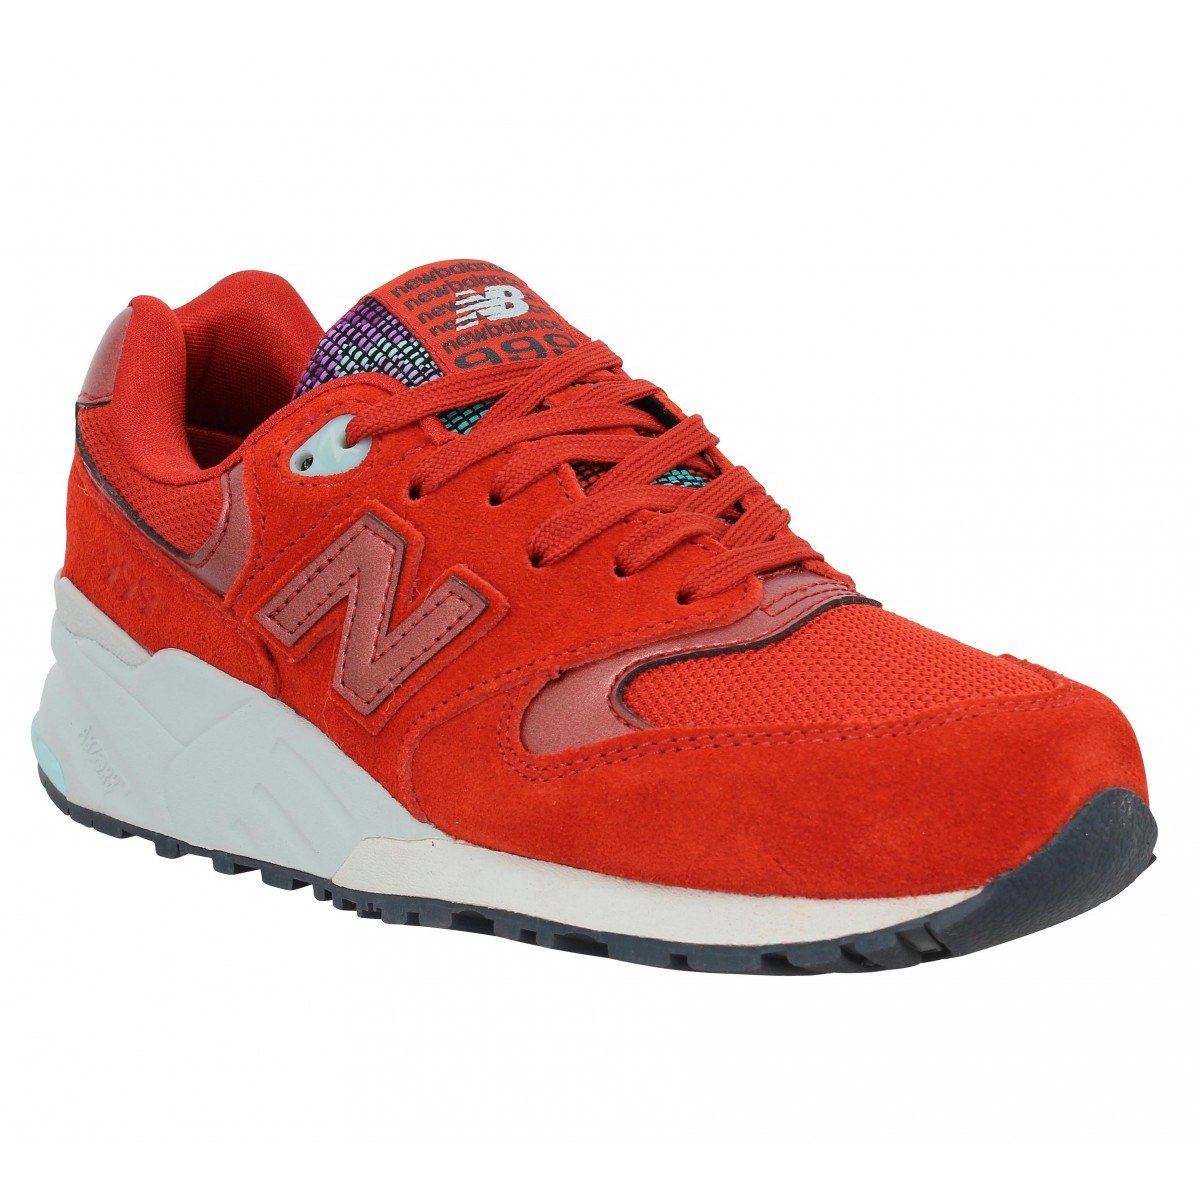 New balance 999 rouge femme | Fanny chaussures